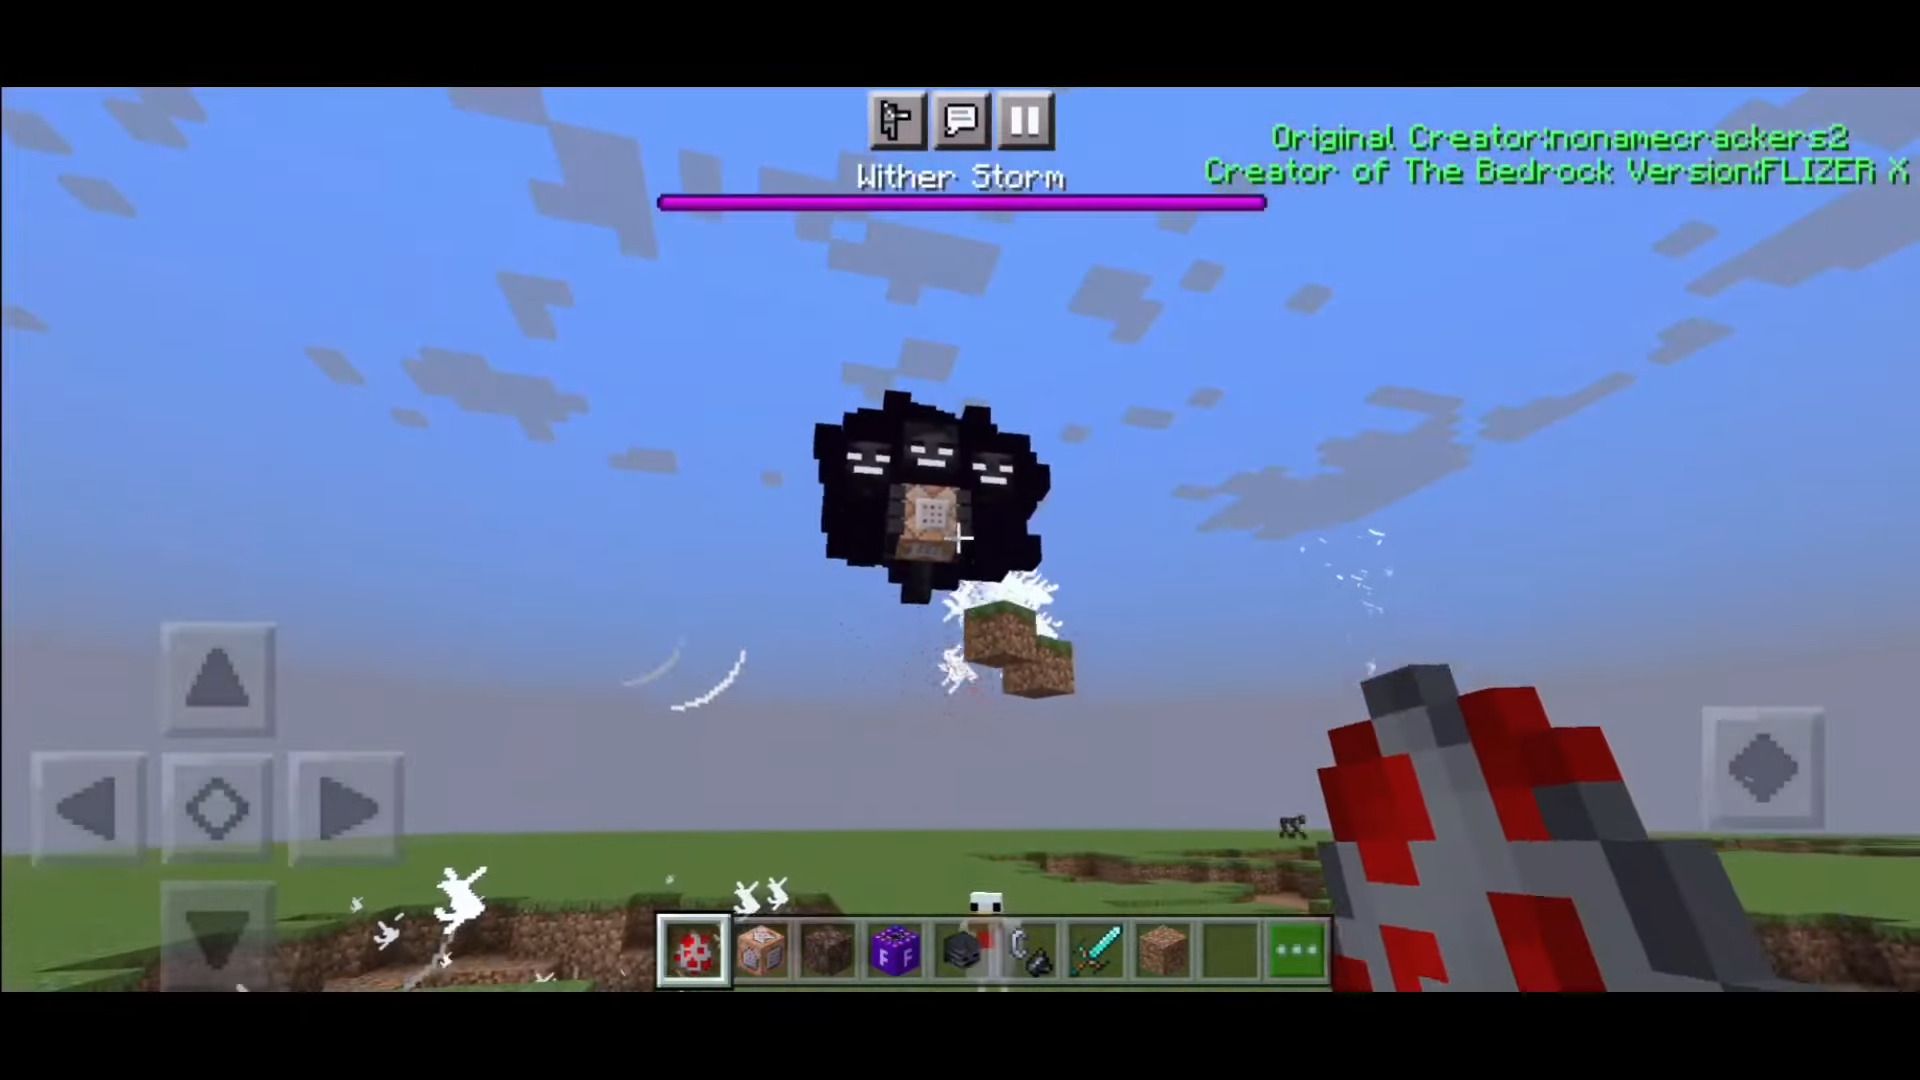 Download Wither Storm Mod for Minecraft android on PC